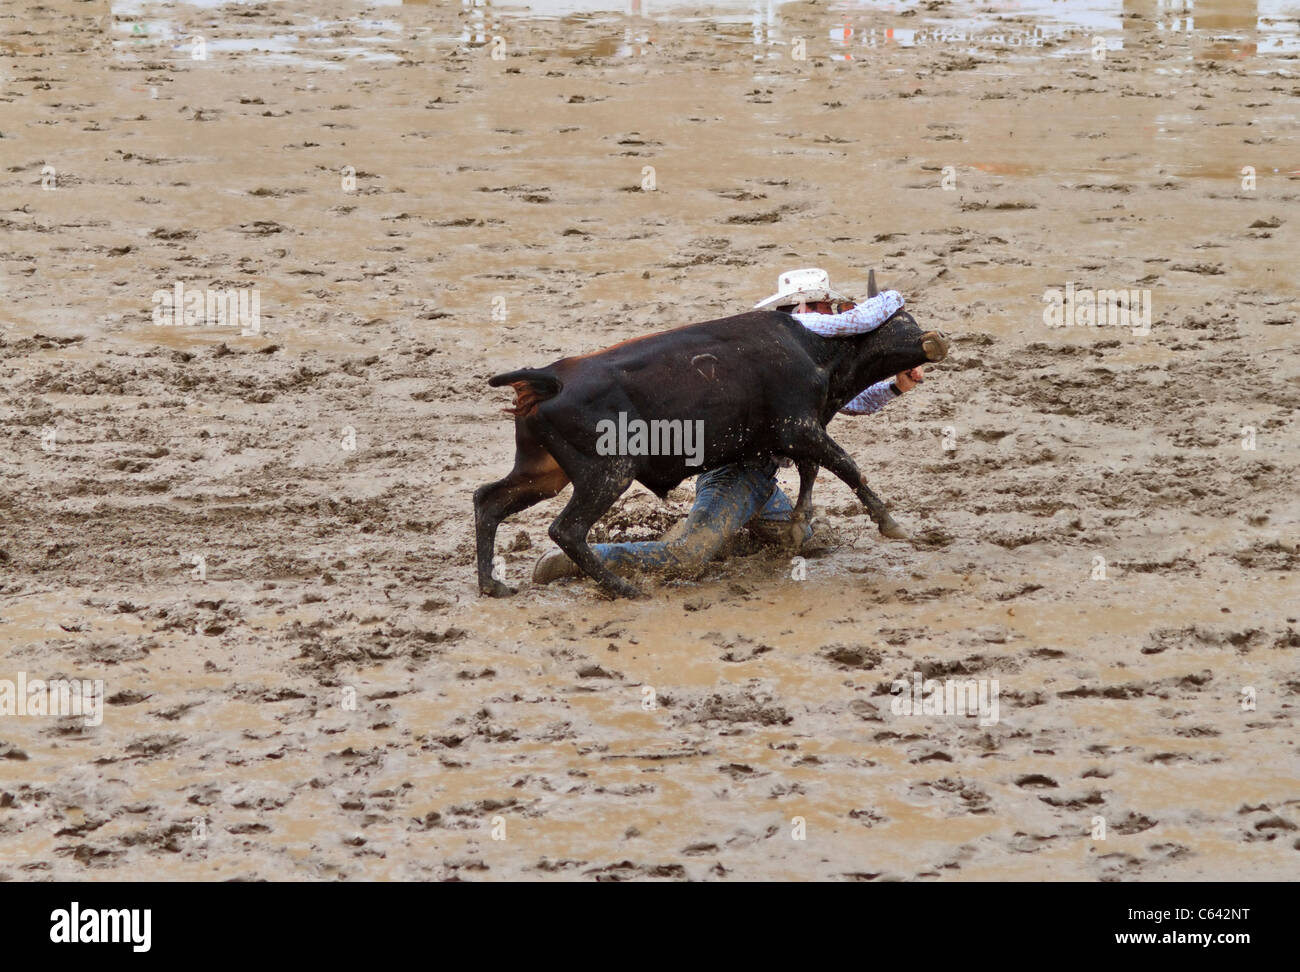 Steer wrestling on a wet and muddy afternoon at the Calgary Stampede, Alberta, Canada. Stock Photo